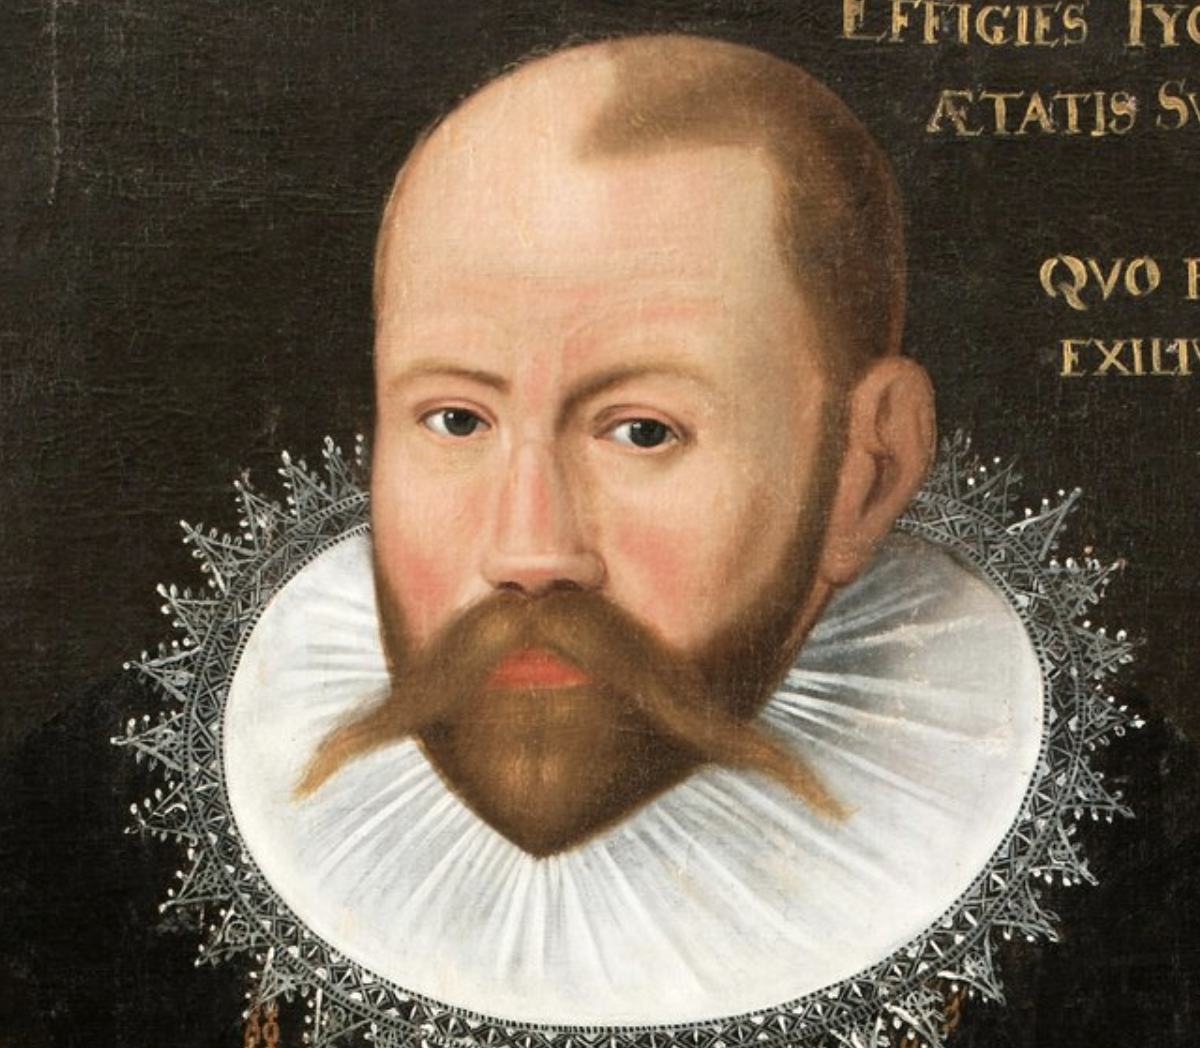 Danish astronomer Tycho Brahe ruptured his bladder and died after holding in his urine for too long, while trying to be polite at a royal banquet.